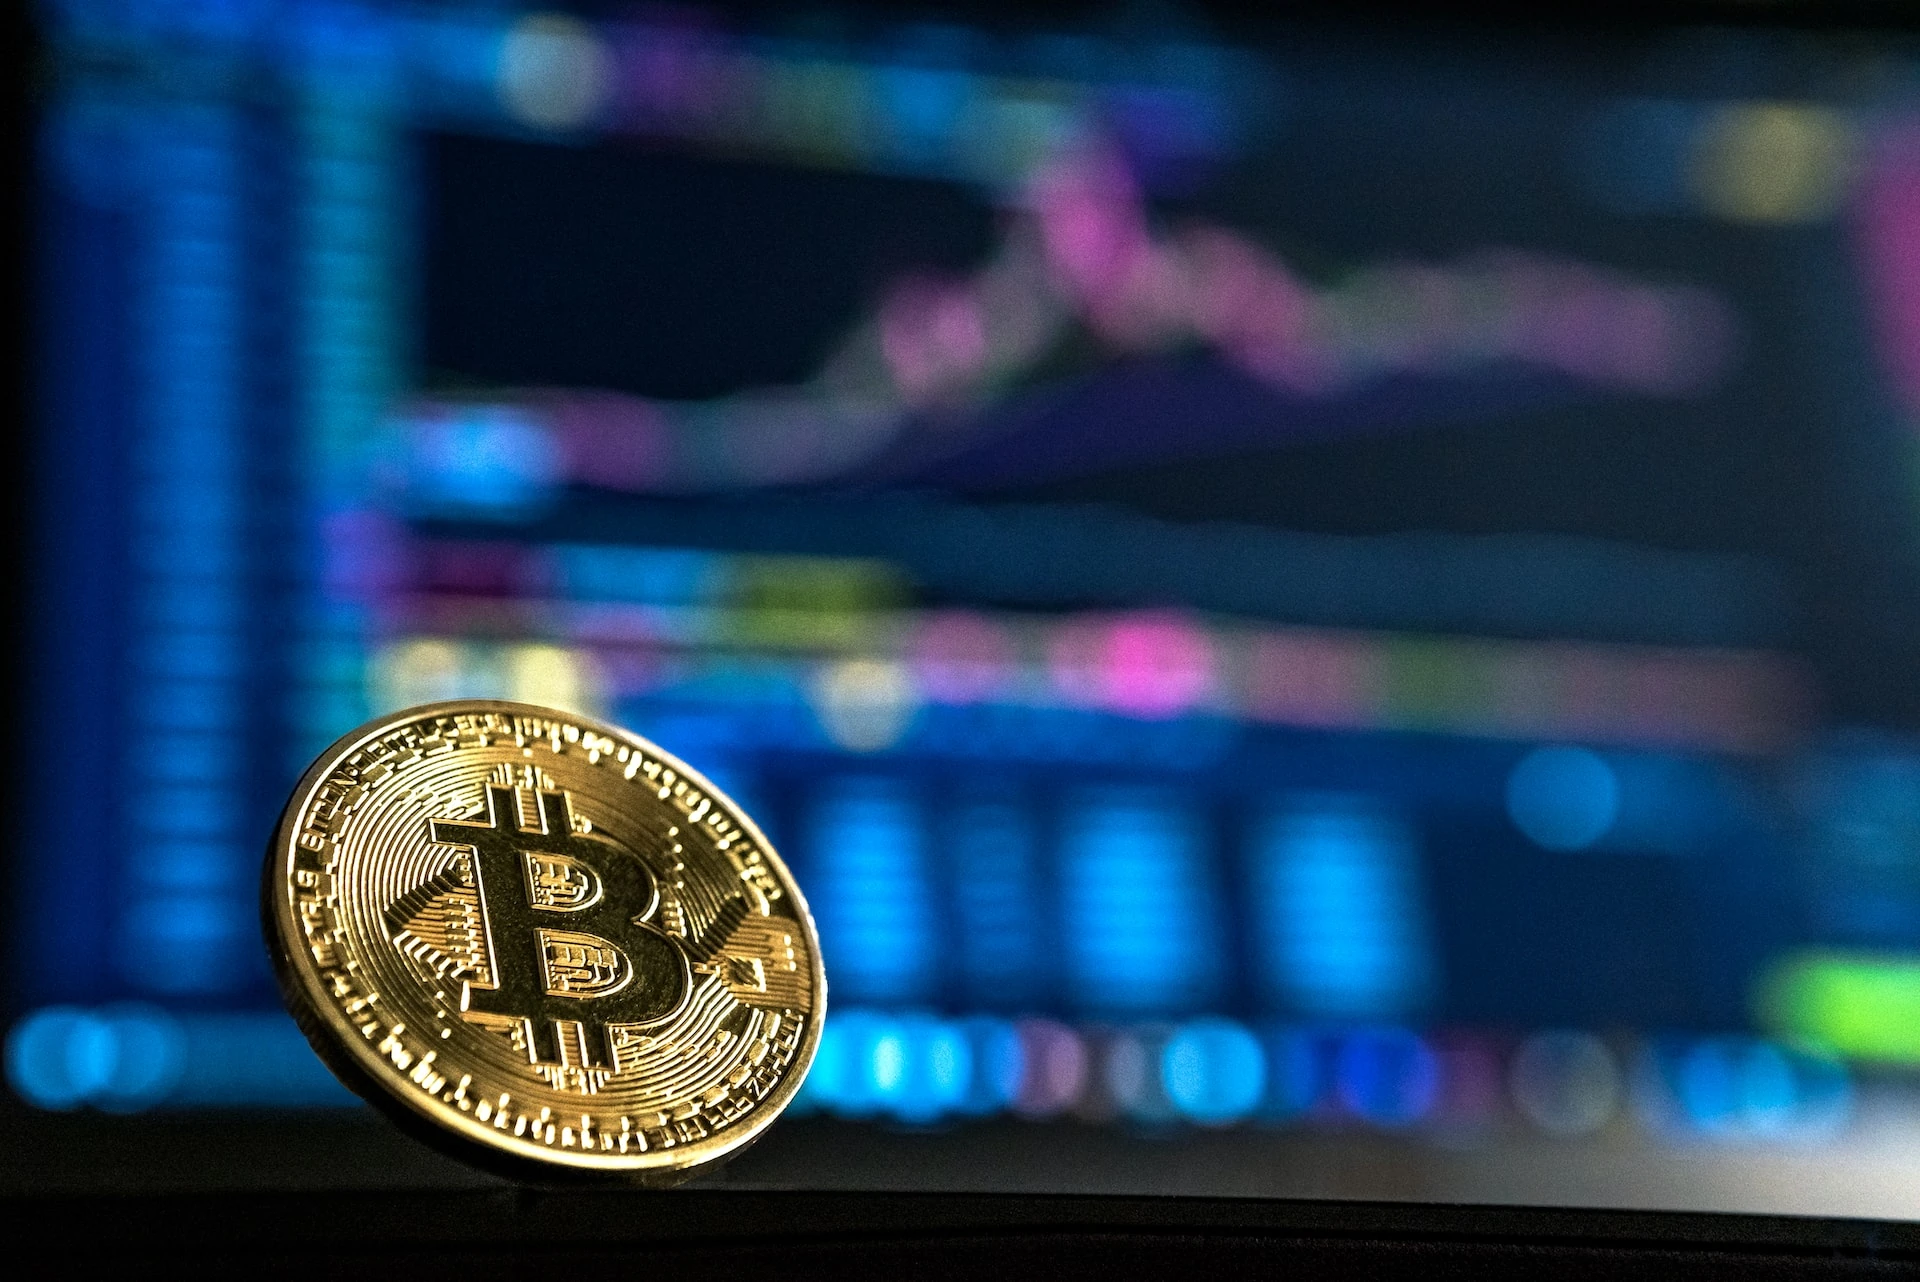 Bitcoin is a popular payment method for online brokers